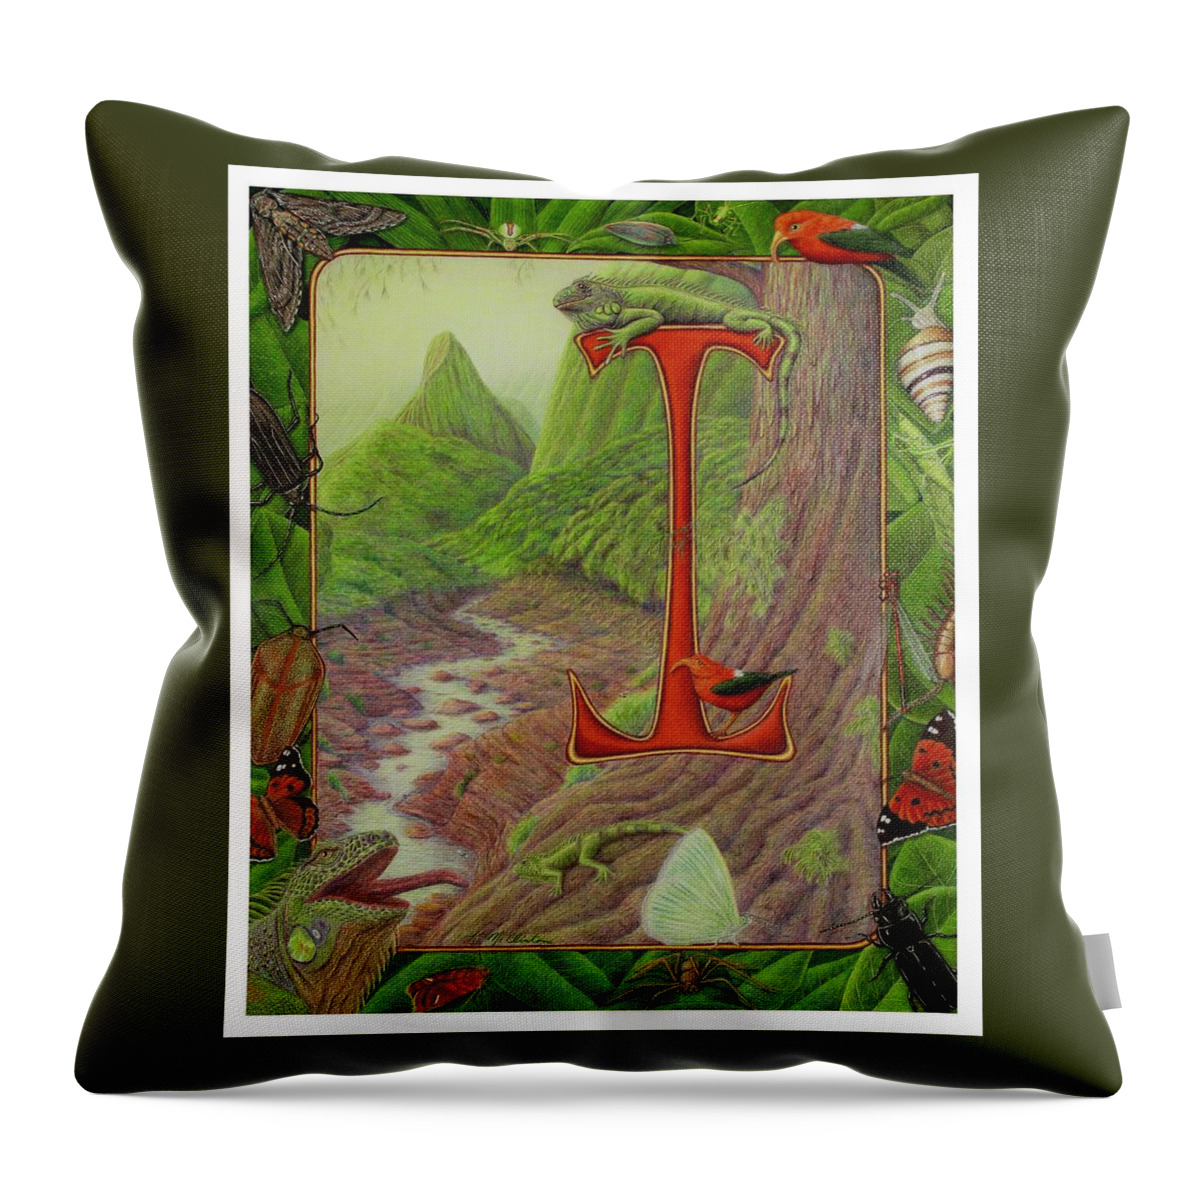 Kim Mcclinton Throw Pillow featuring the drawing I is for Iguana by Kim McClinton